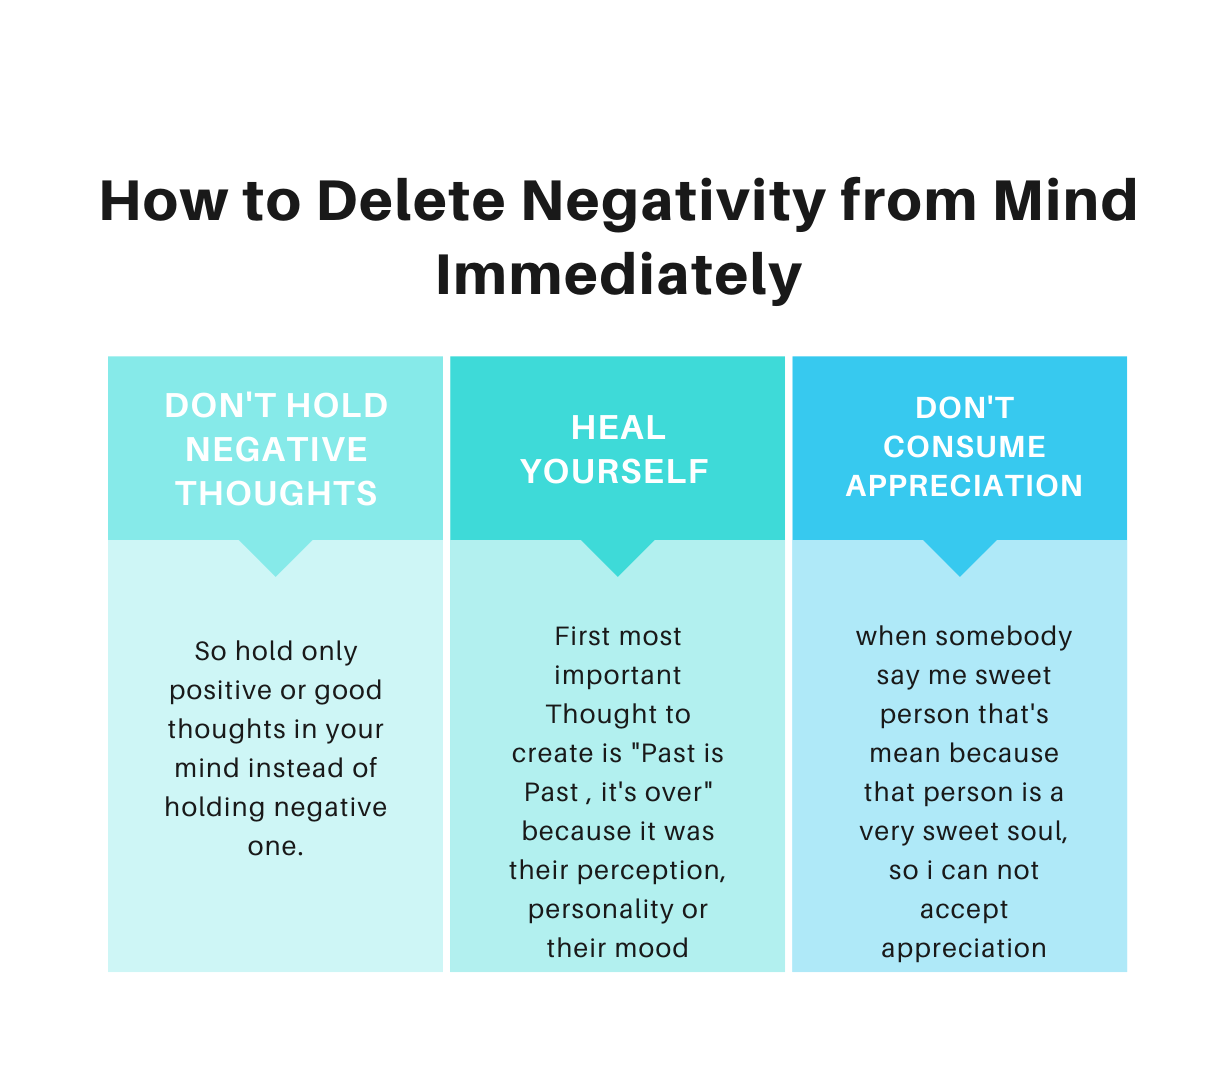 How to Delete Negativity from Mind